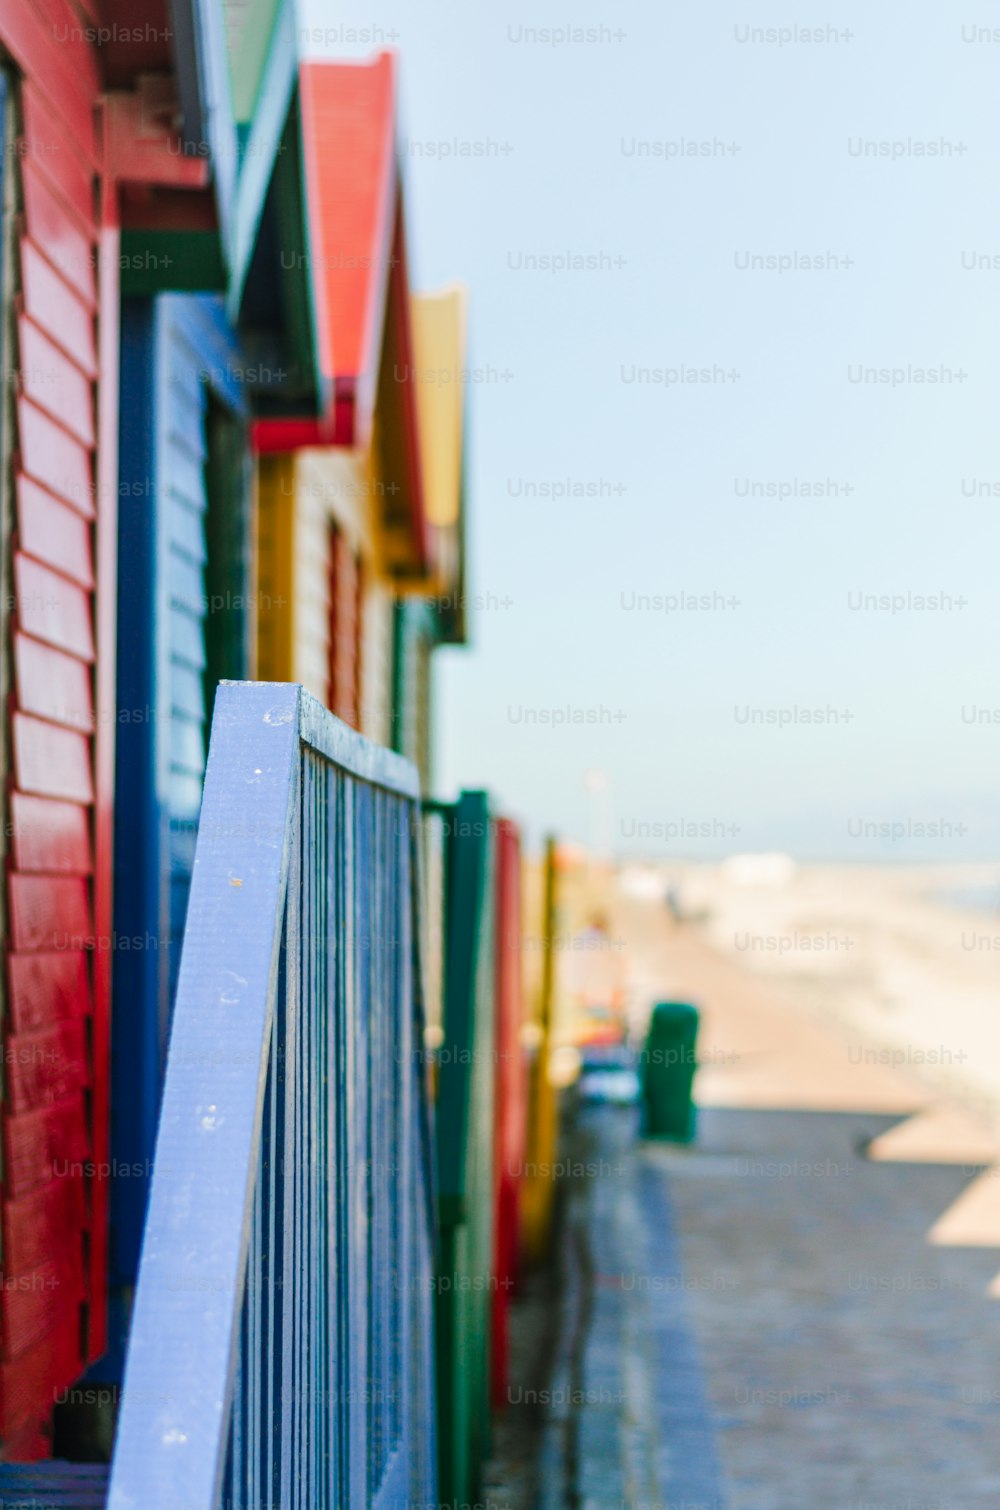 a row of colorful beach huts next to the ocean